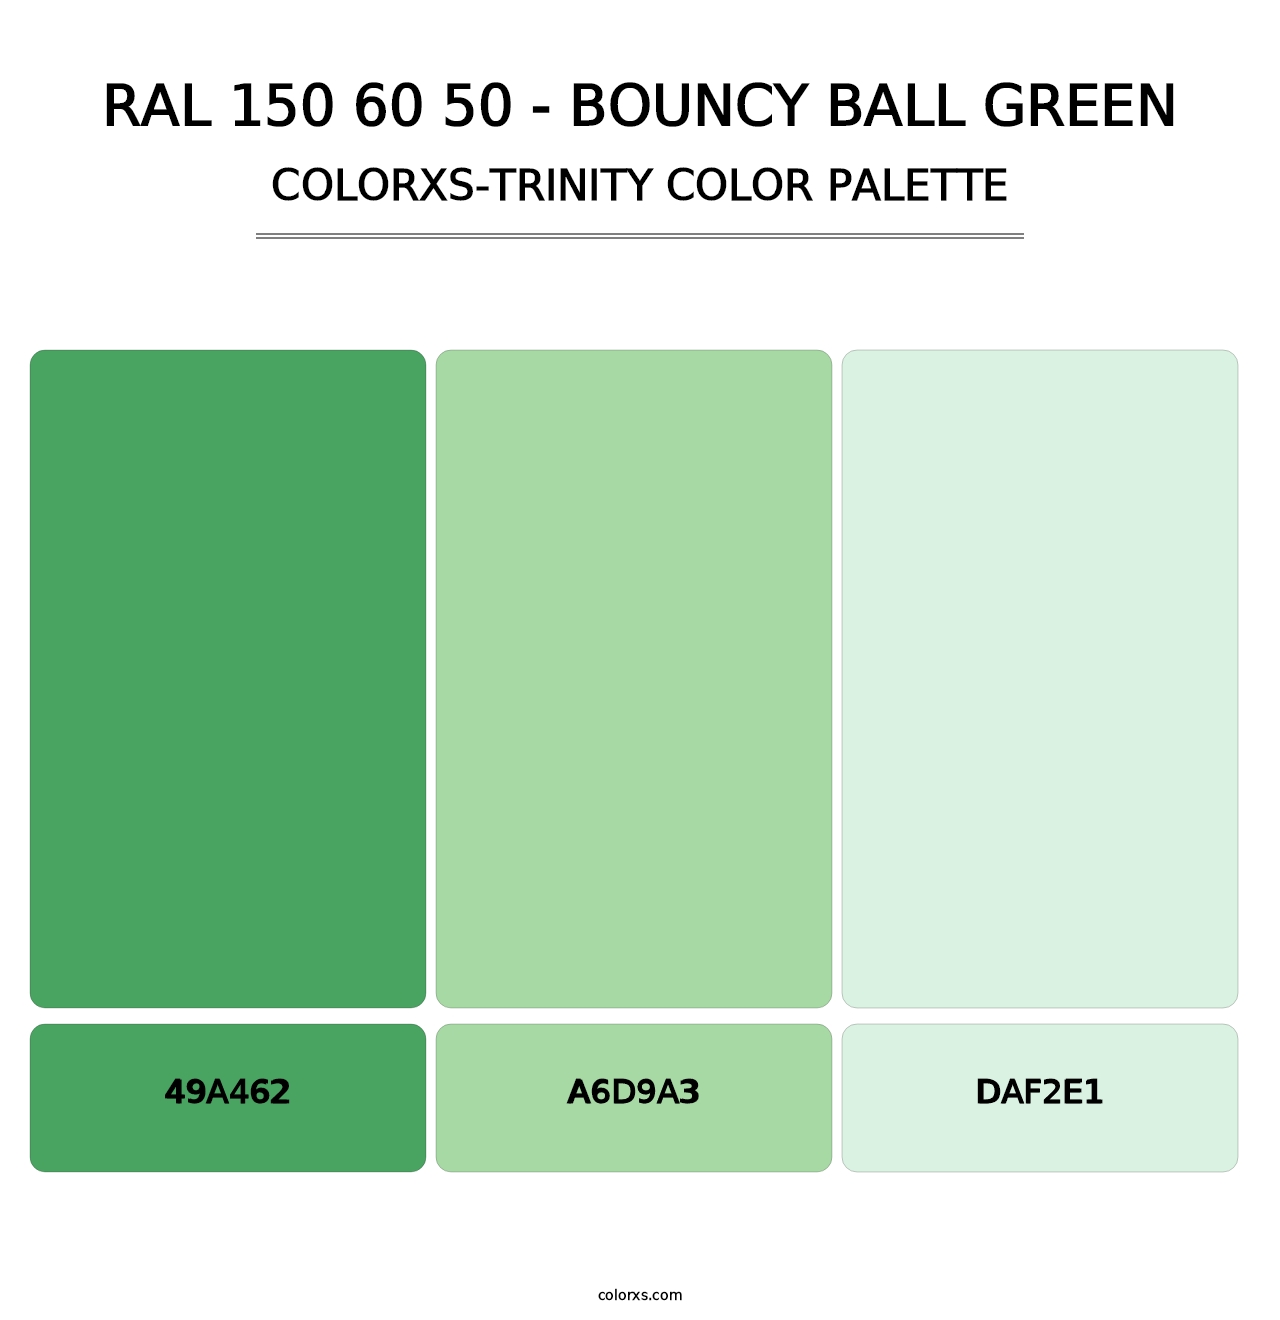 RAL 150 60 50 - Bouncy Ball Green - Colorxs Trinity Palette